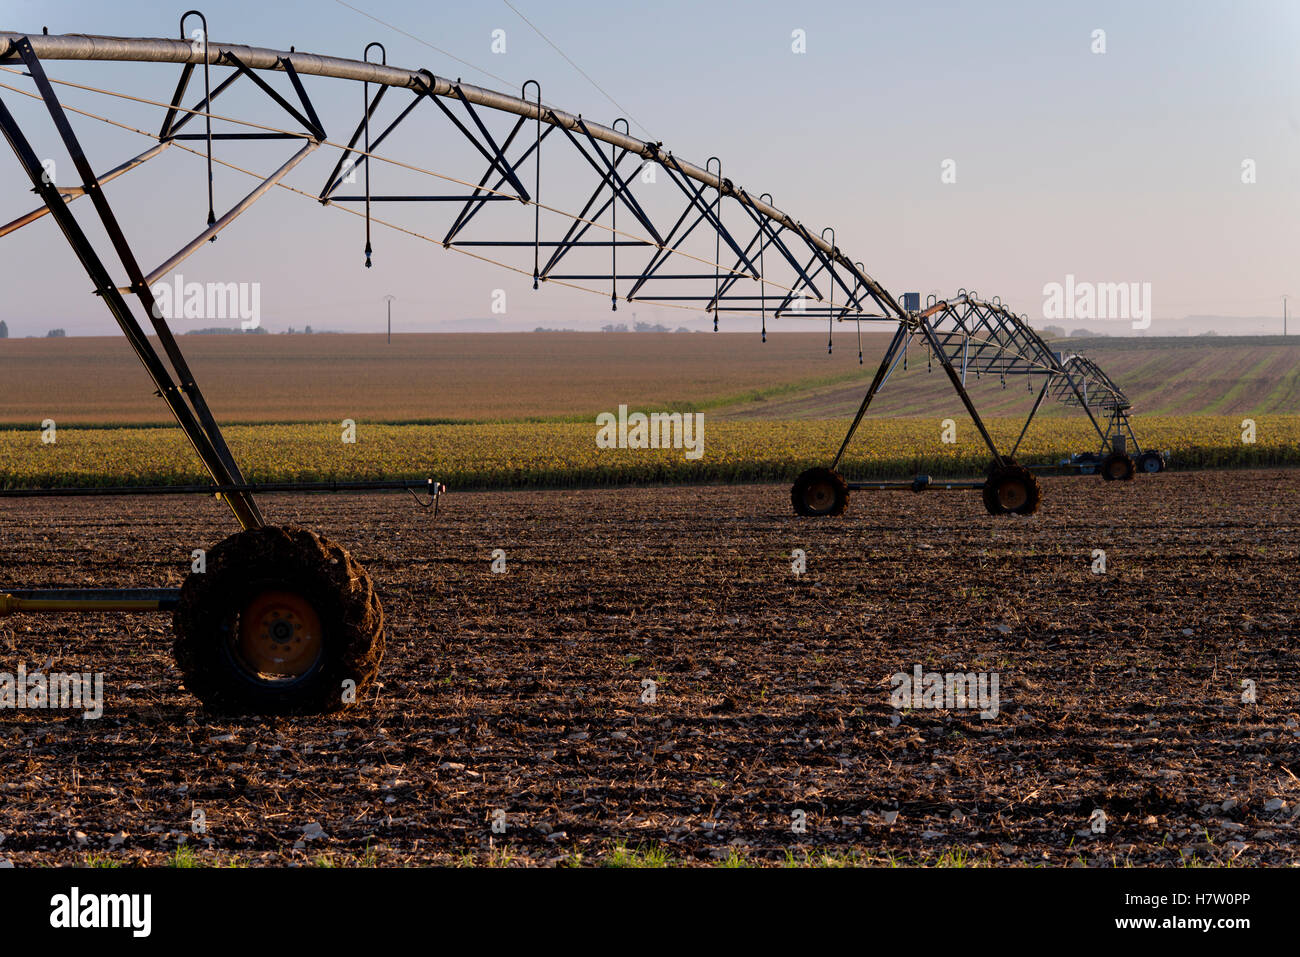 Agricultural irrigation system Stock Photo